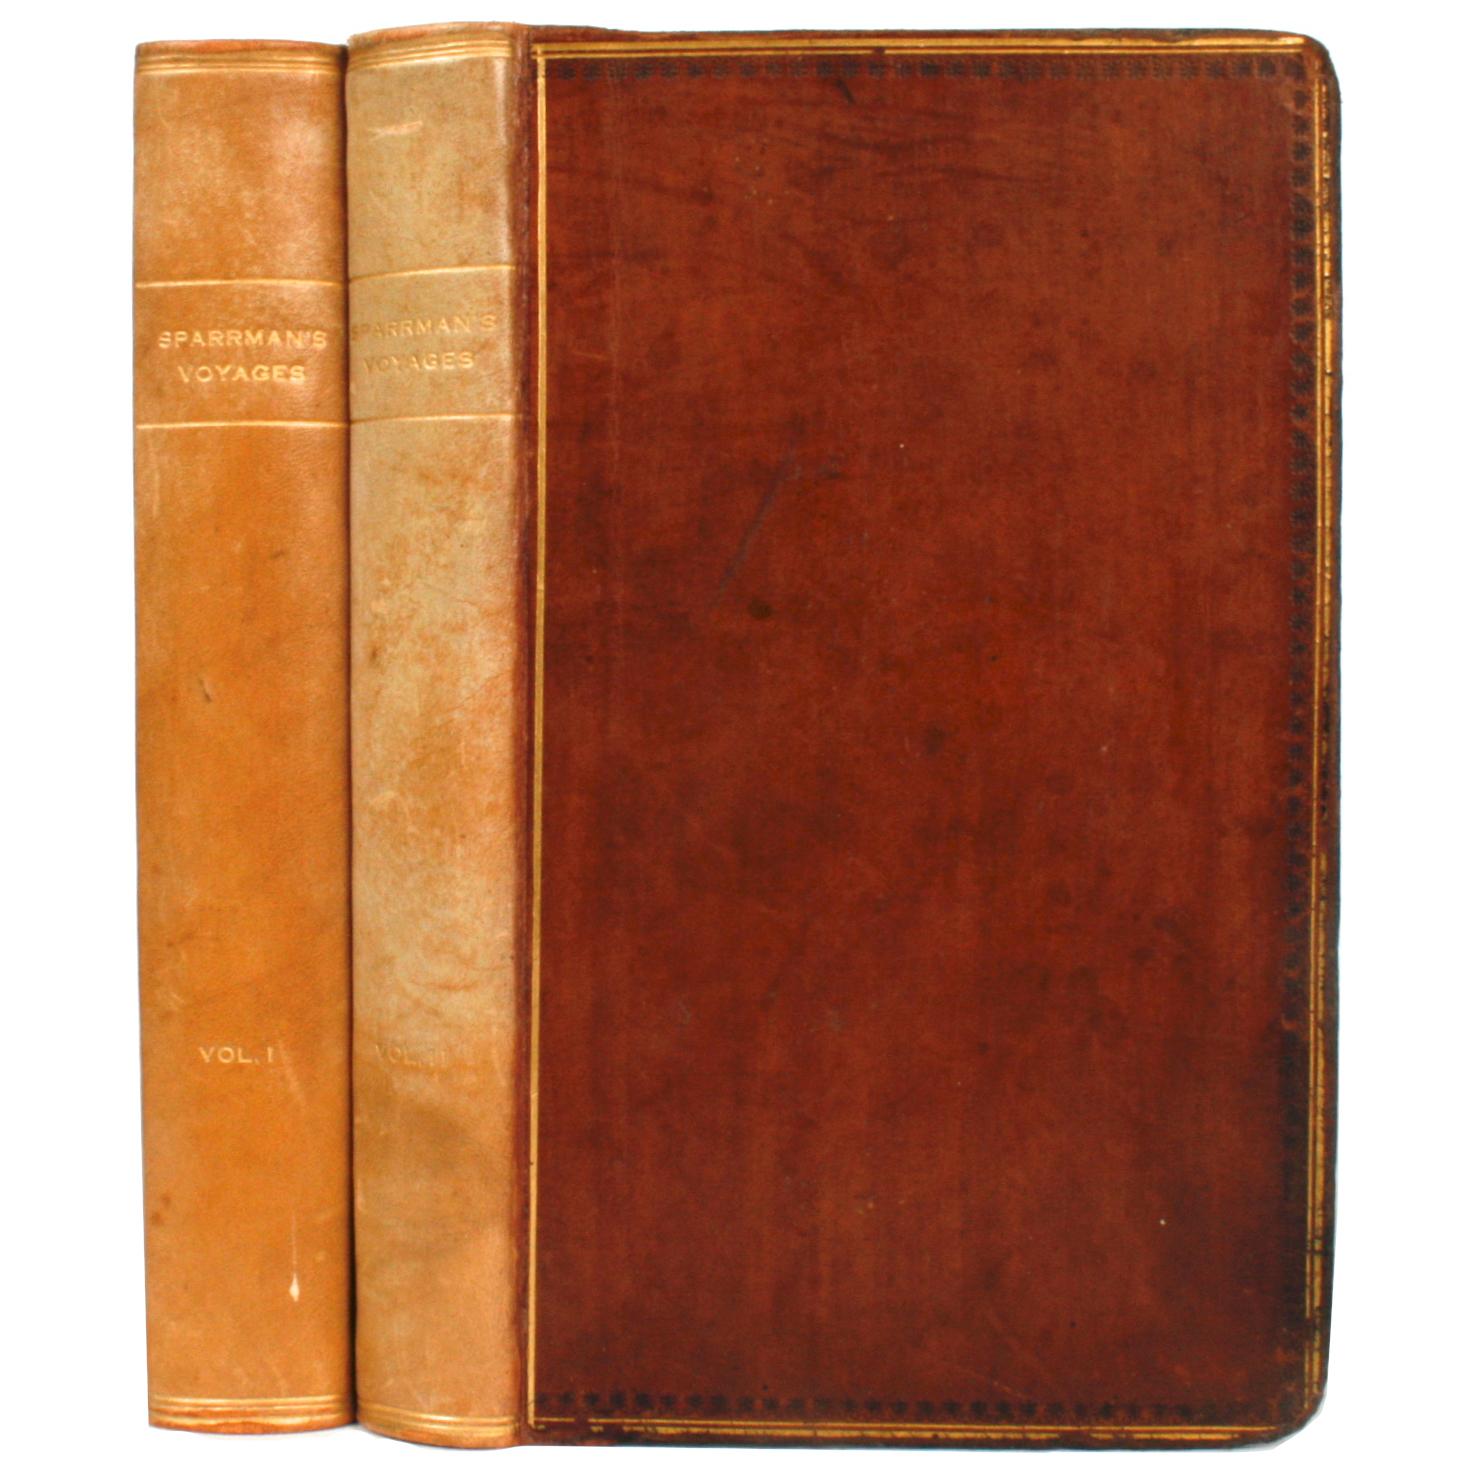 Voyage to the Cape of Good Hope, First Edition, c1785